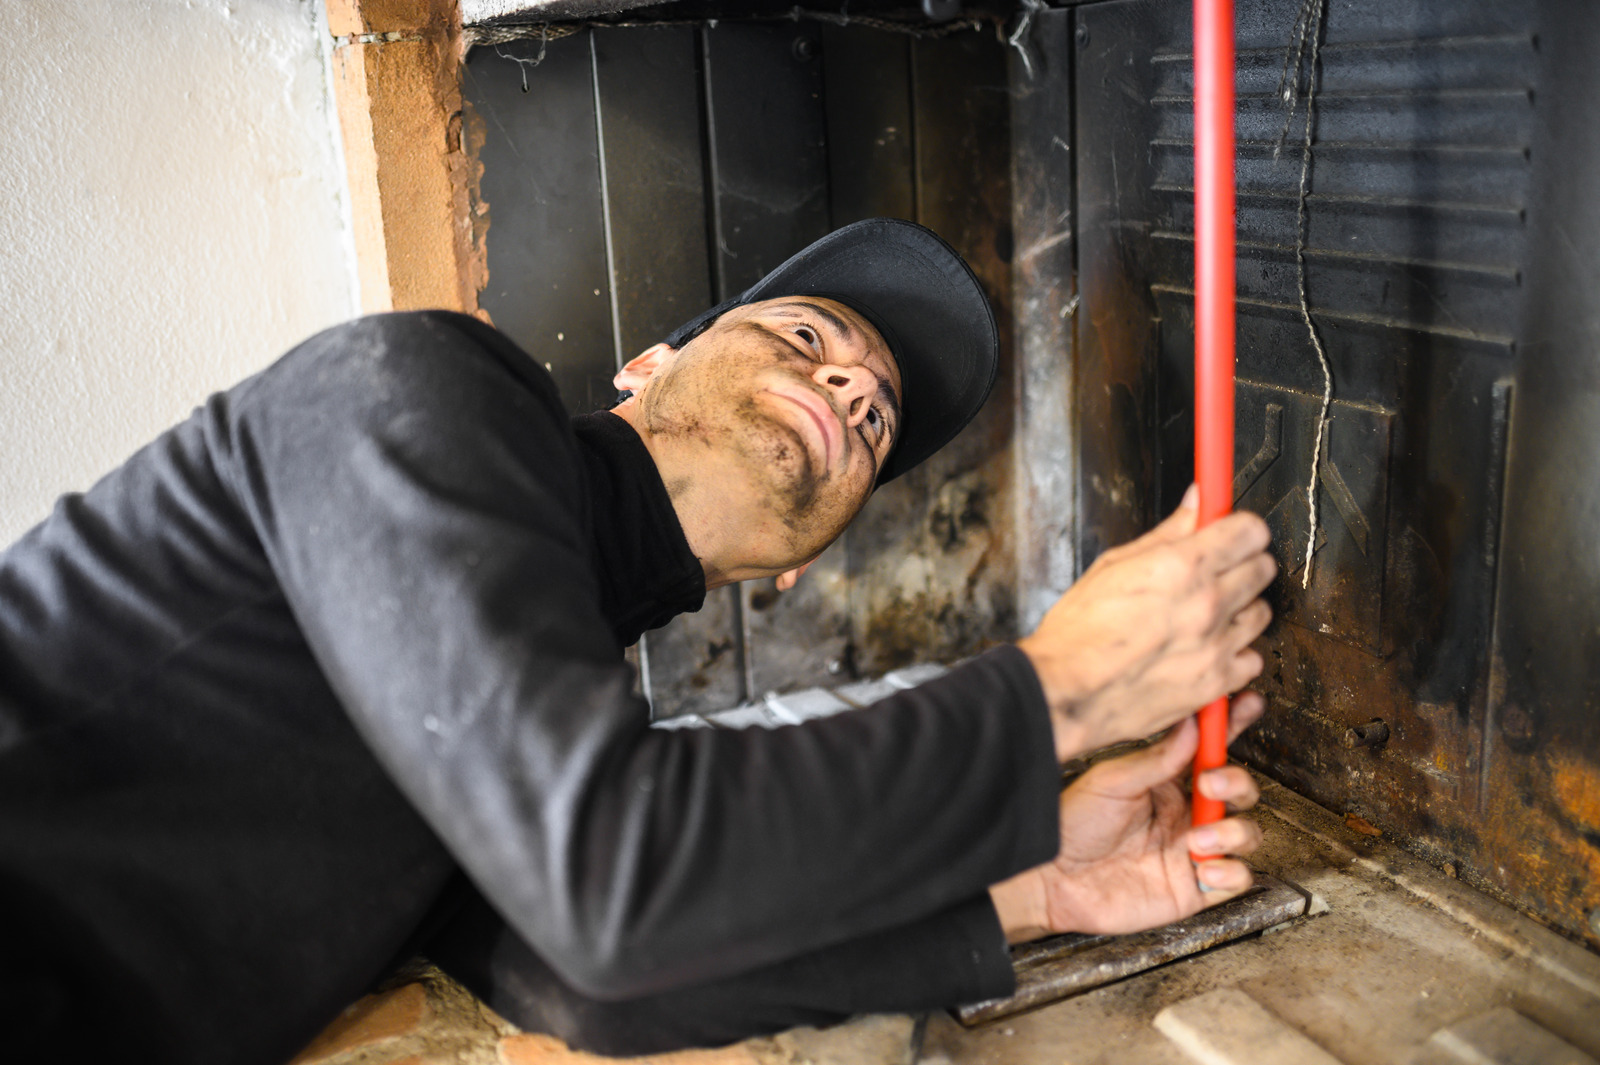 Local Cisco Chimney Sweep Services - Shane’s Chimney Care